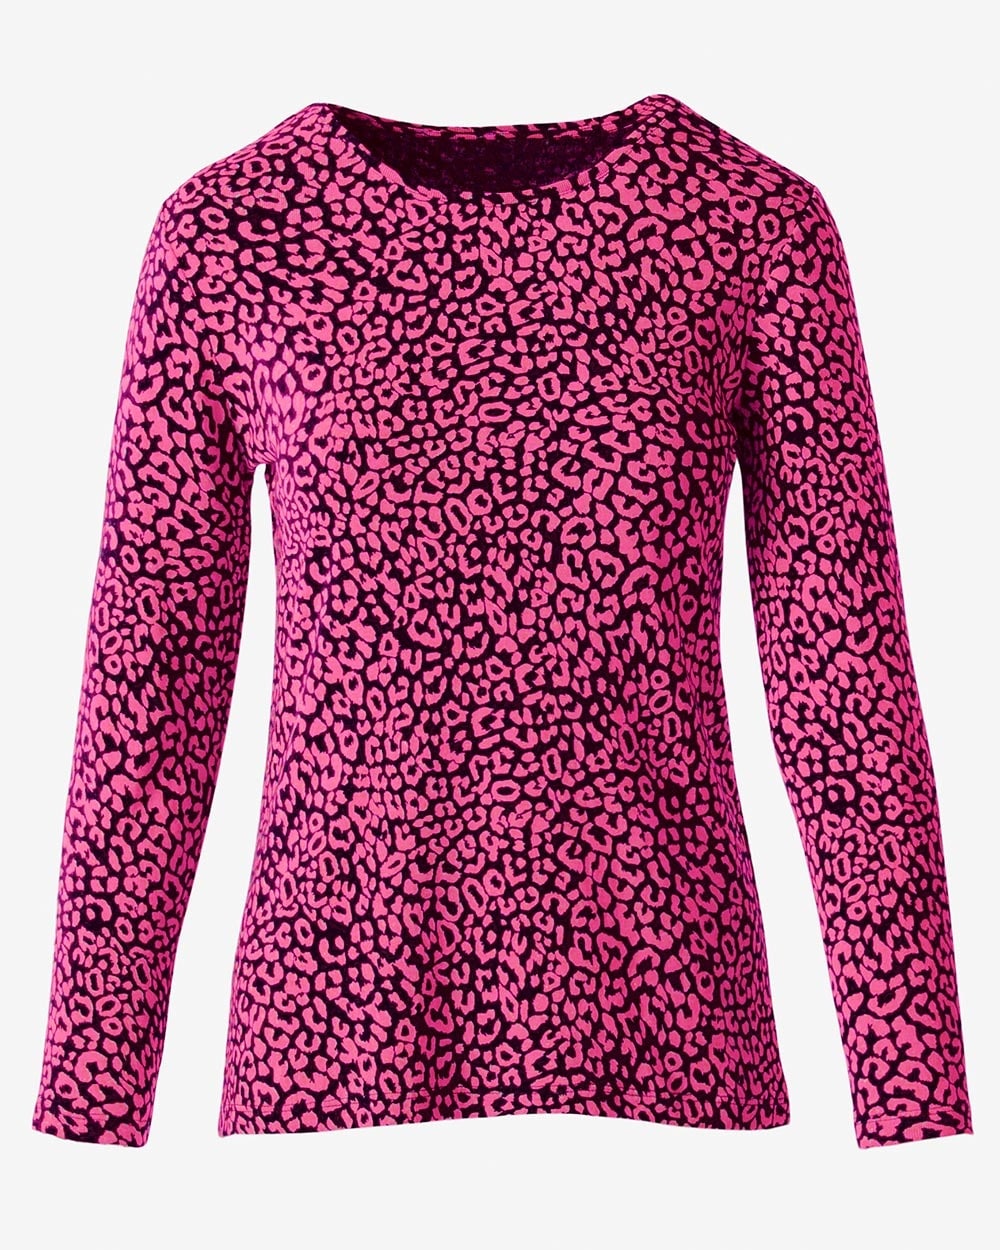 Graphic Leopard Long-Sleeve Tee